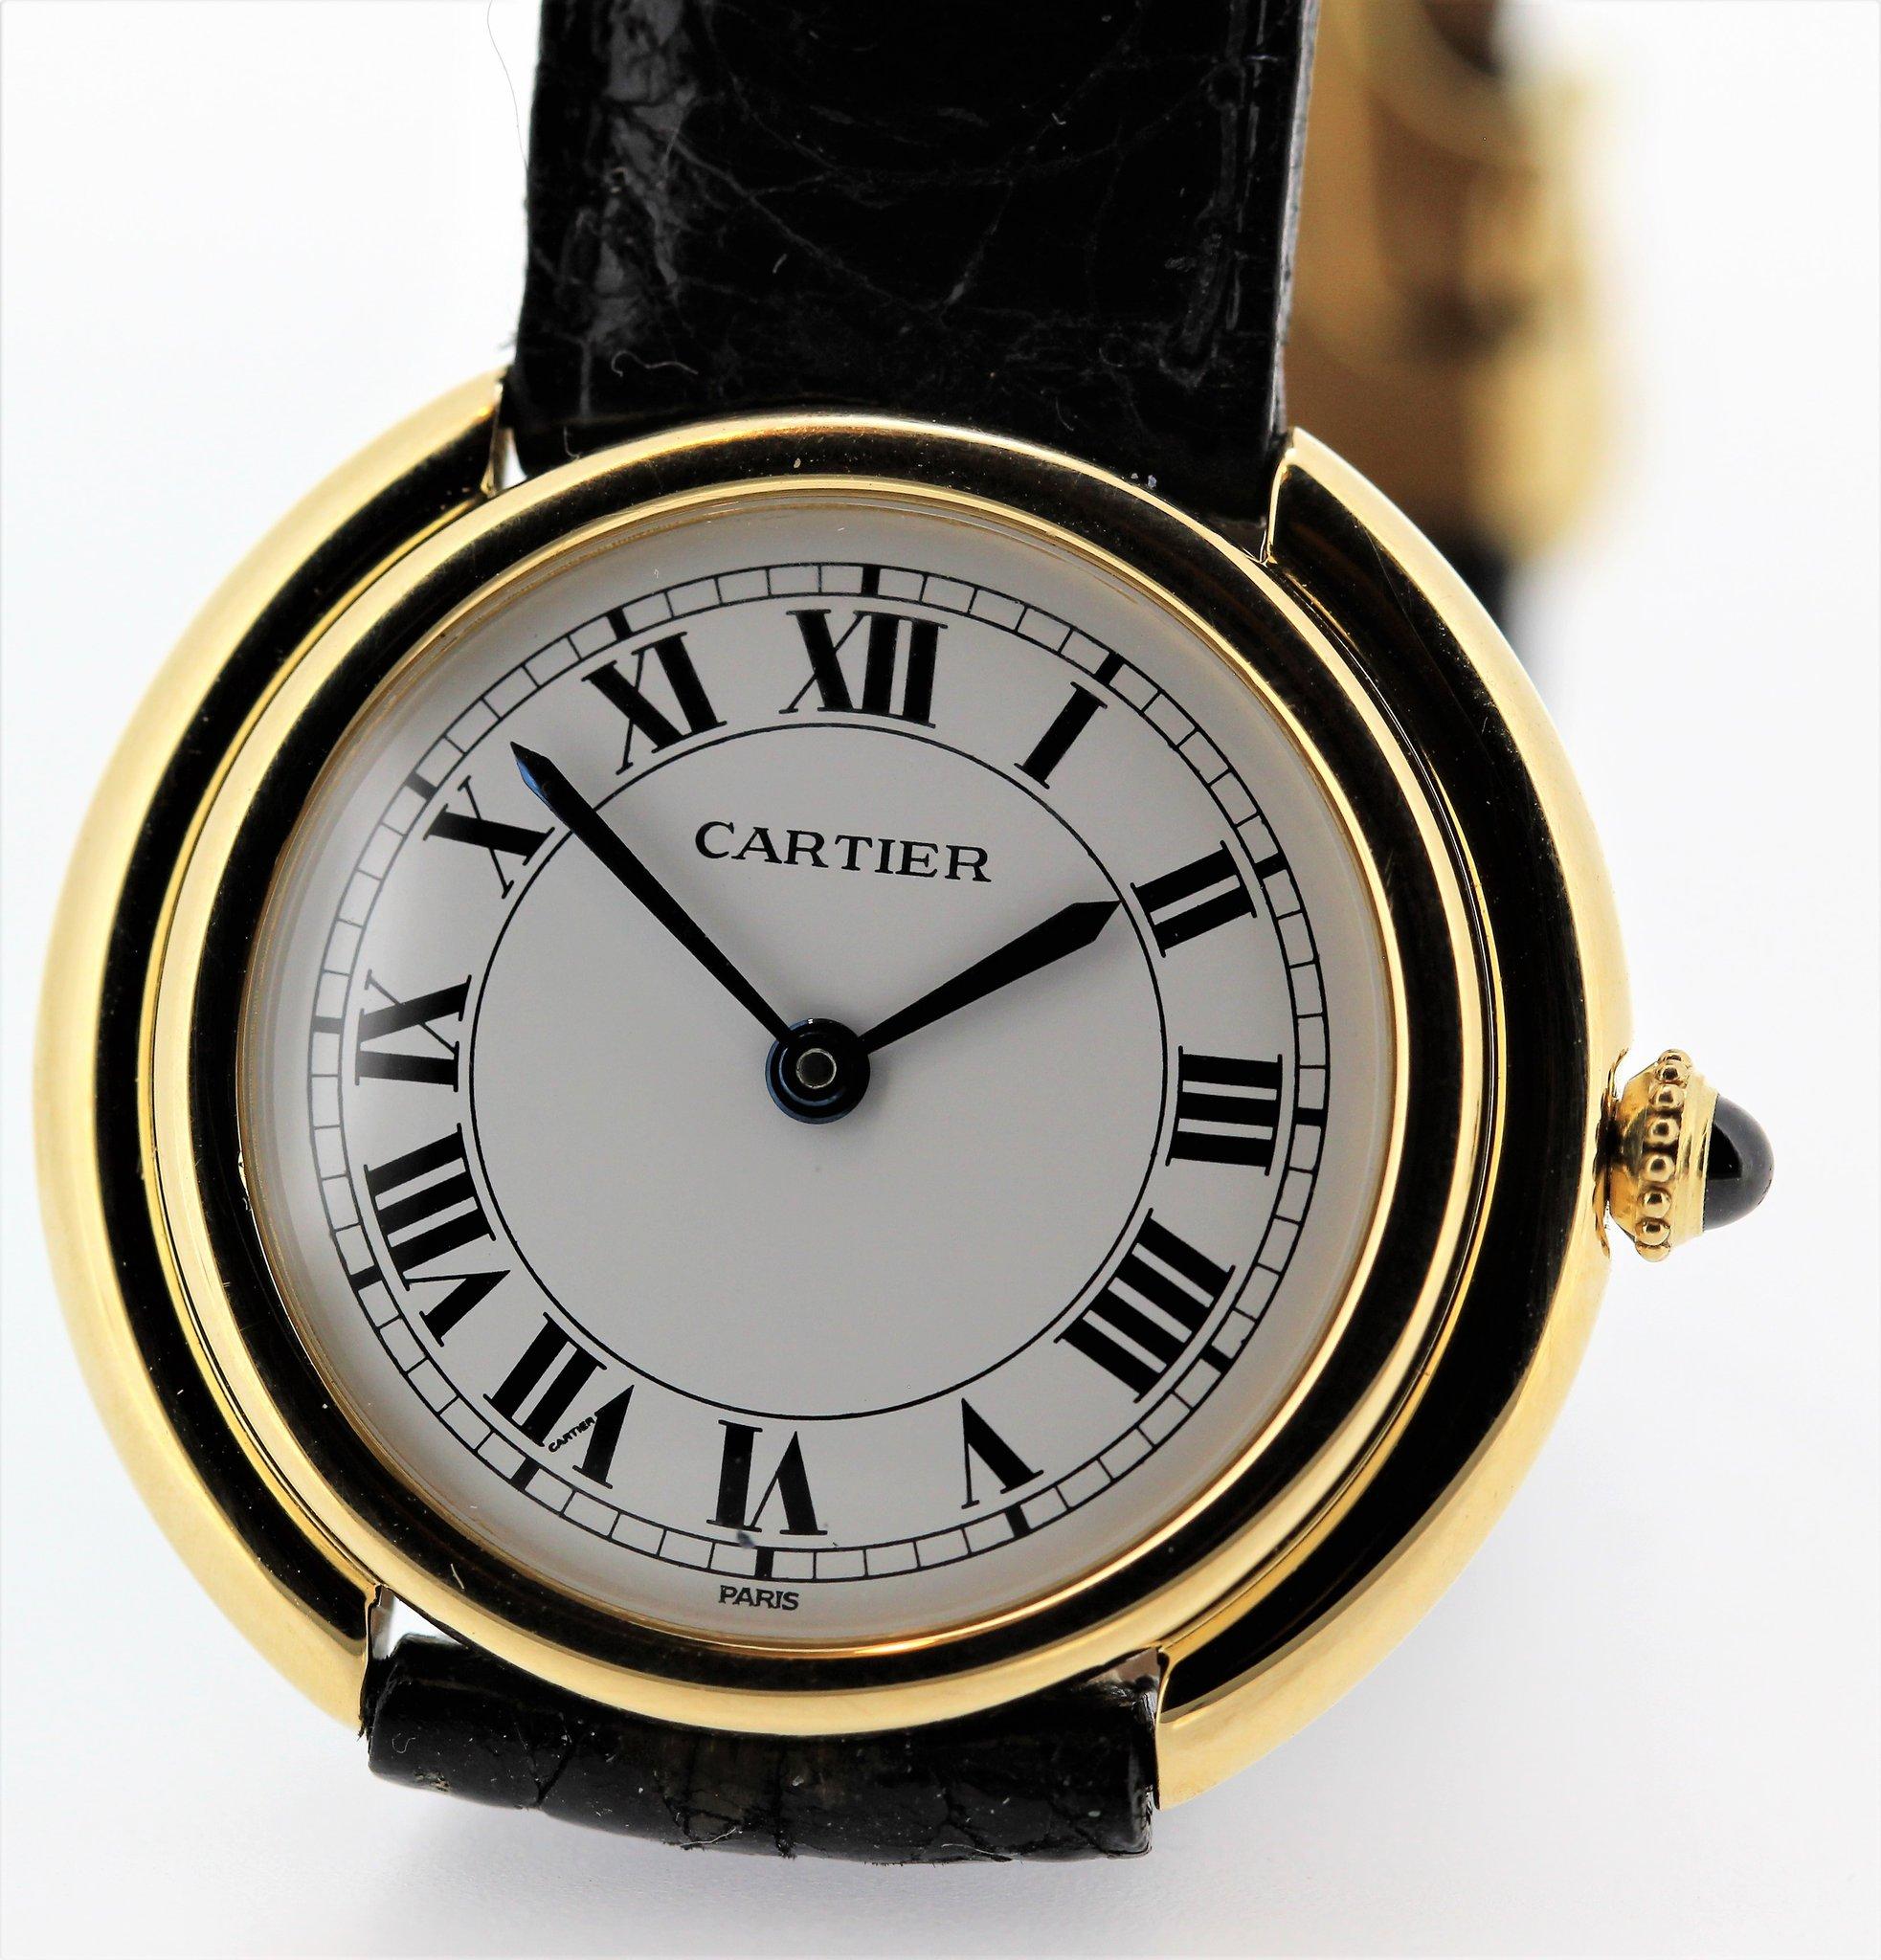 Introduction:
This Vintage Cartier Paris Vendome watch is the large size, circa 1975-1980.  It is 18K yellow gold and measures 33 mm with an automatic movement.  It has a Cartier crocodile strap and 18K Cartier Deployant Buckle.  It is Triple